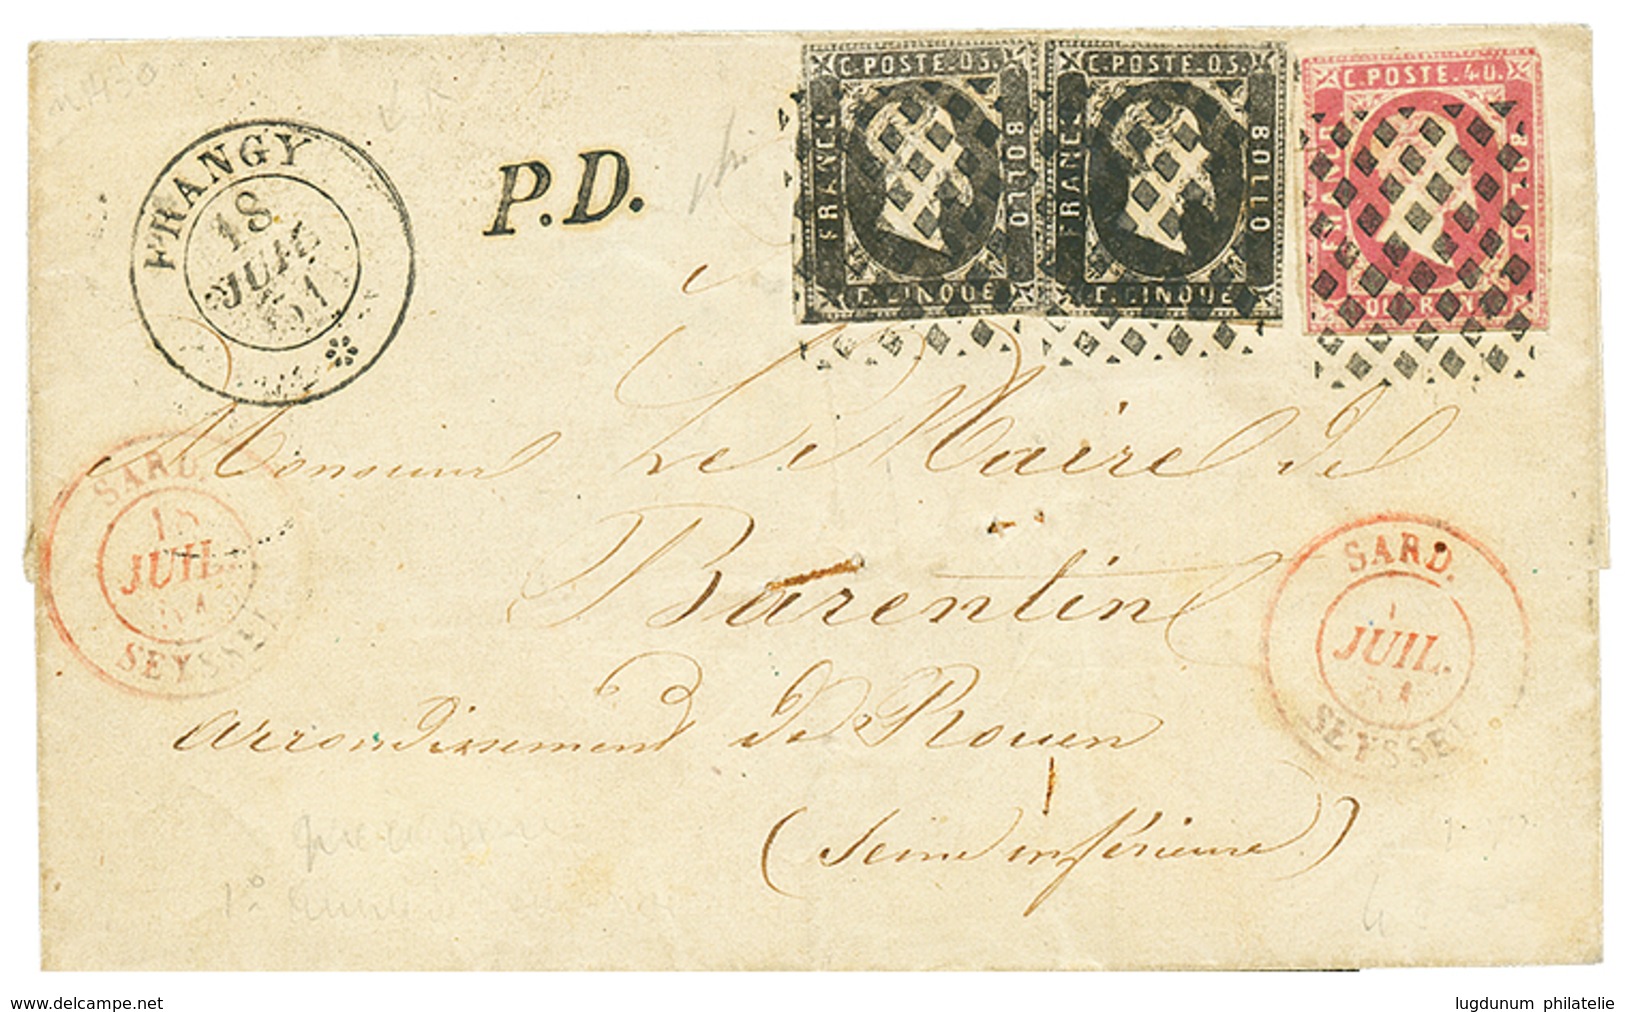 1160 SARDINIA 1851 5c(n°1d) + 5c(n°1b) + 40c(n°3) Canc. ROMBI + FRANGY On Cover To FRANCE. Stamps With Margins Just Touc - Unclassified